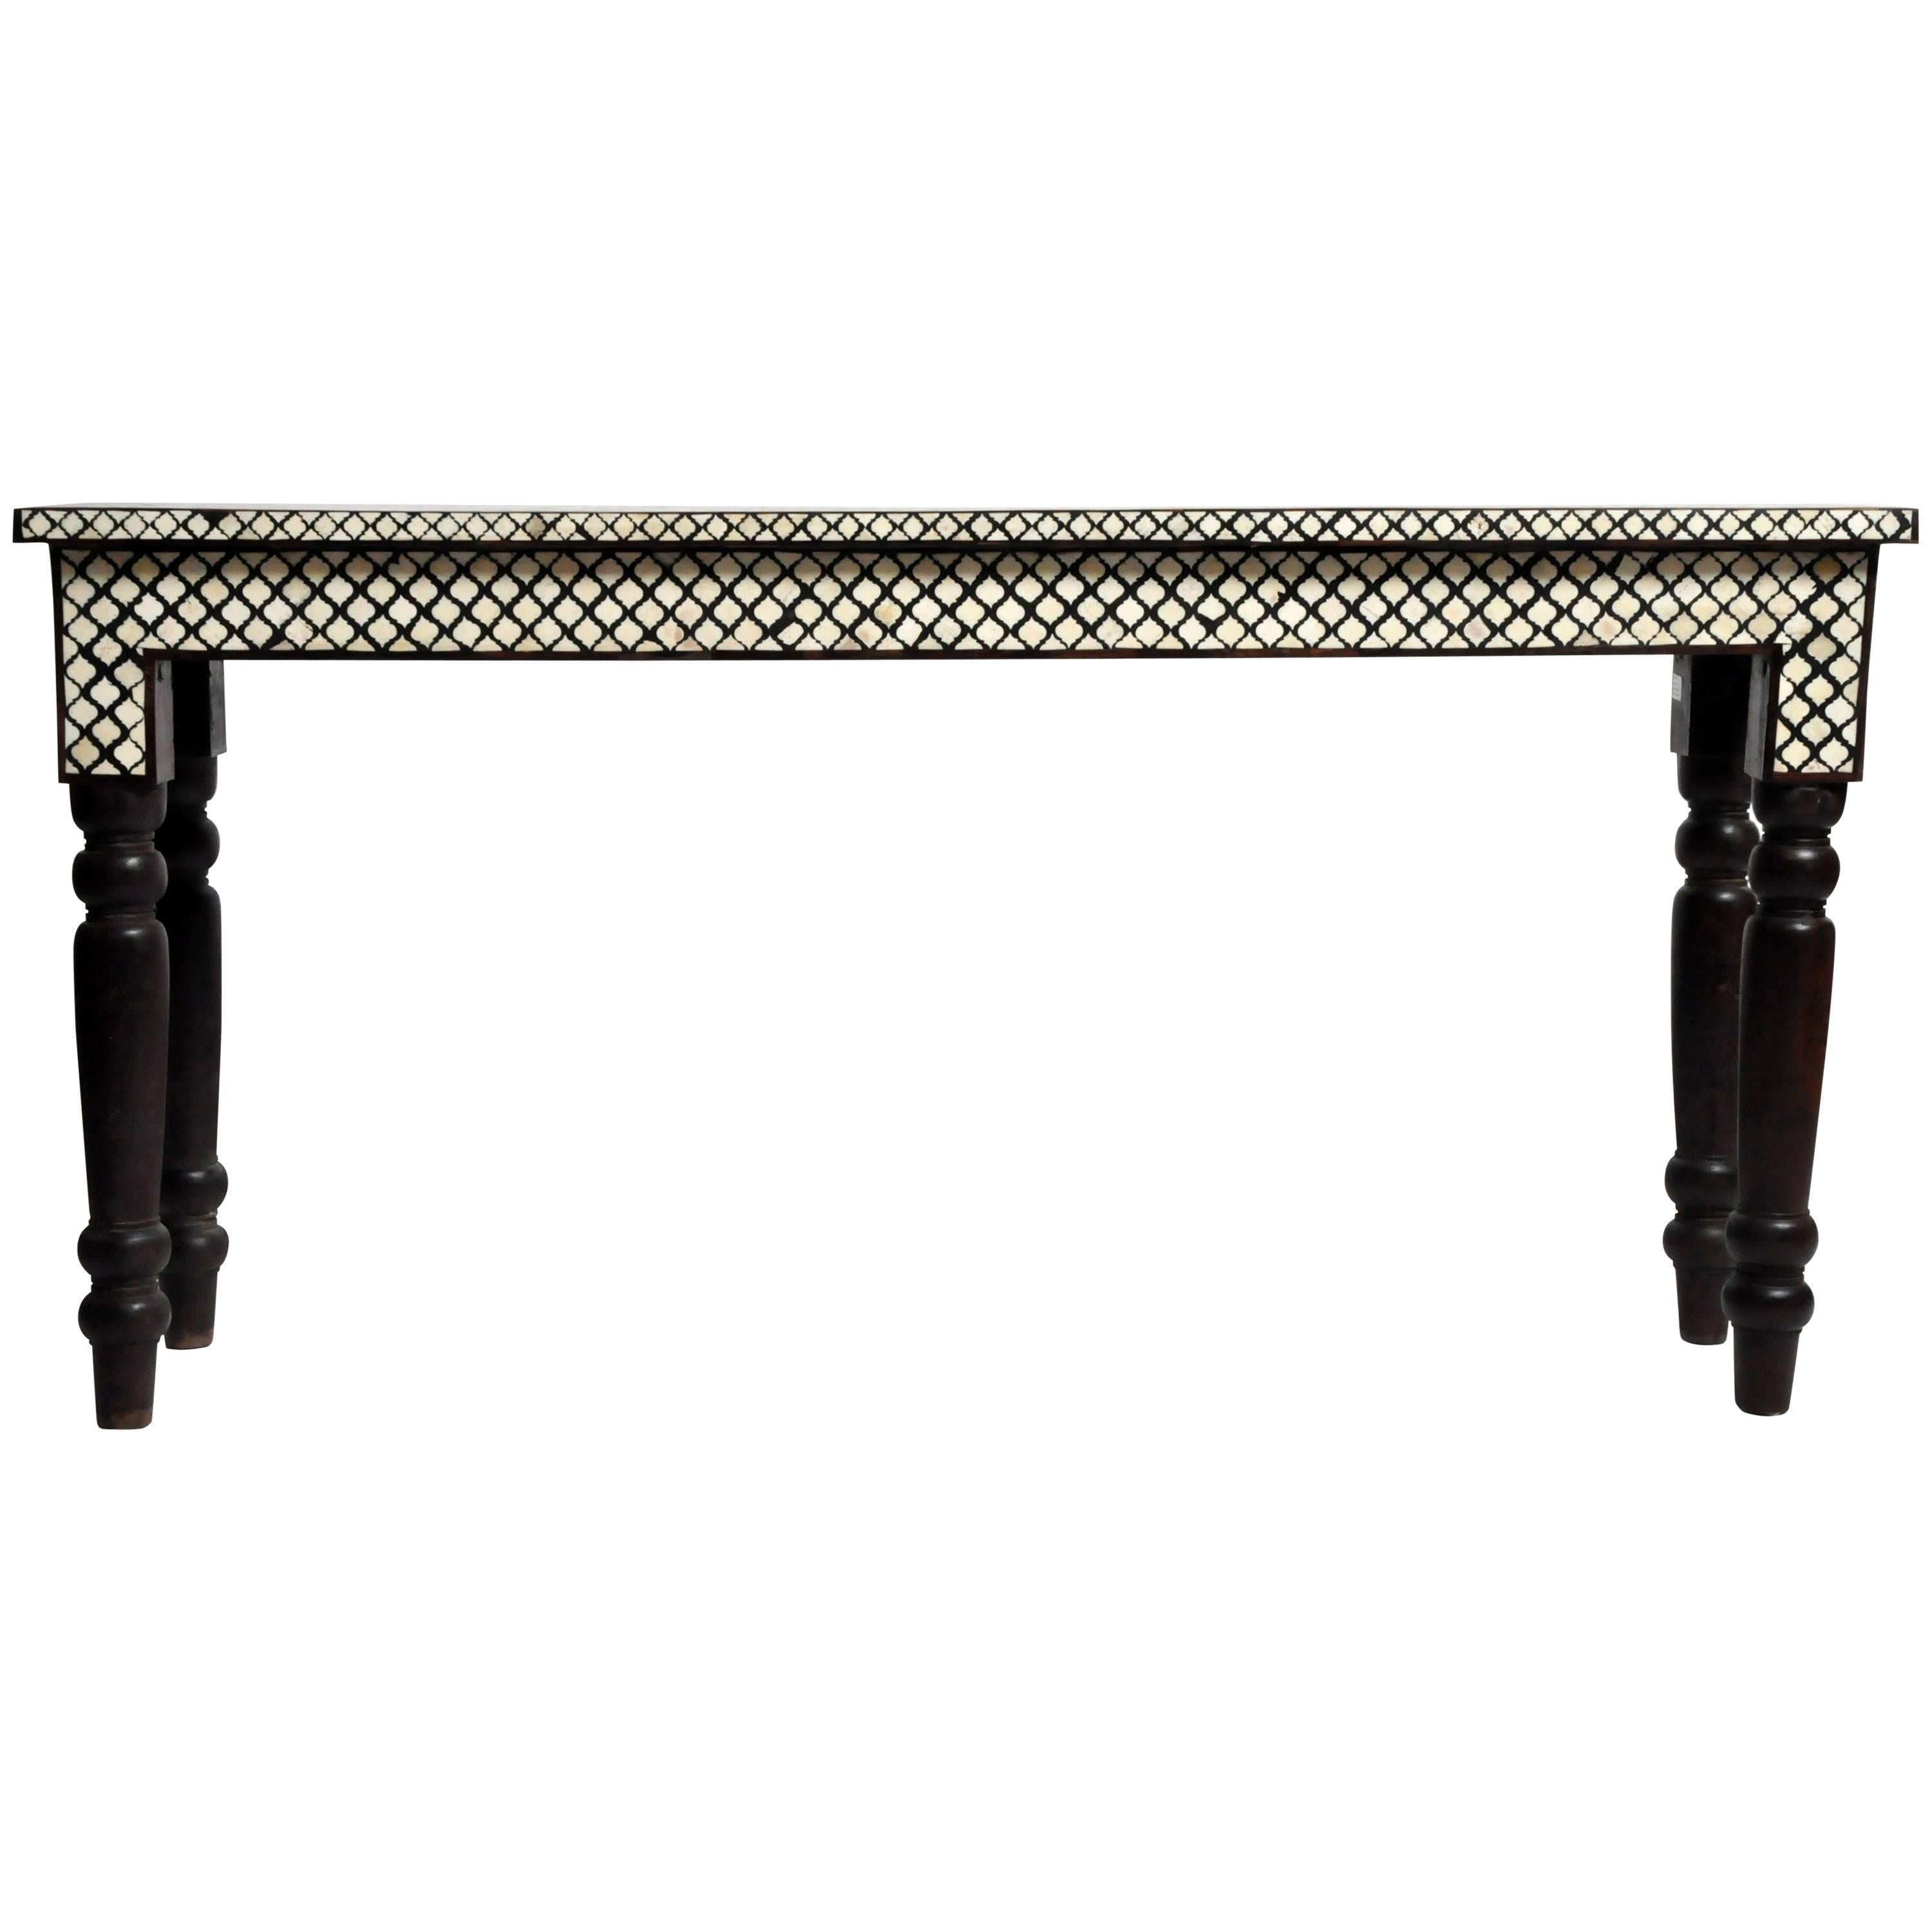 Elongated Bone Inlay Console Table